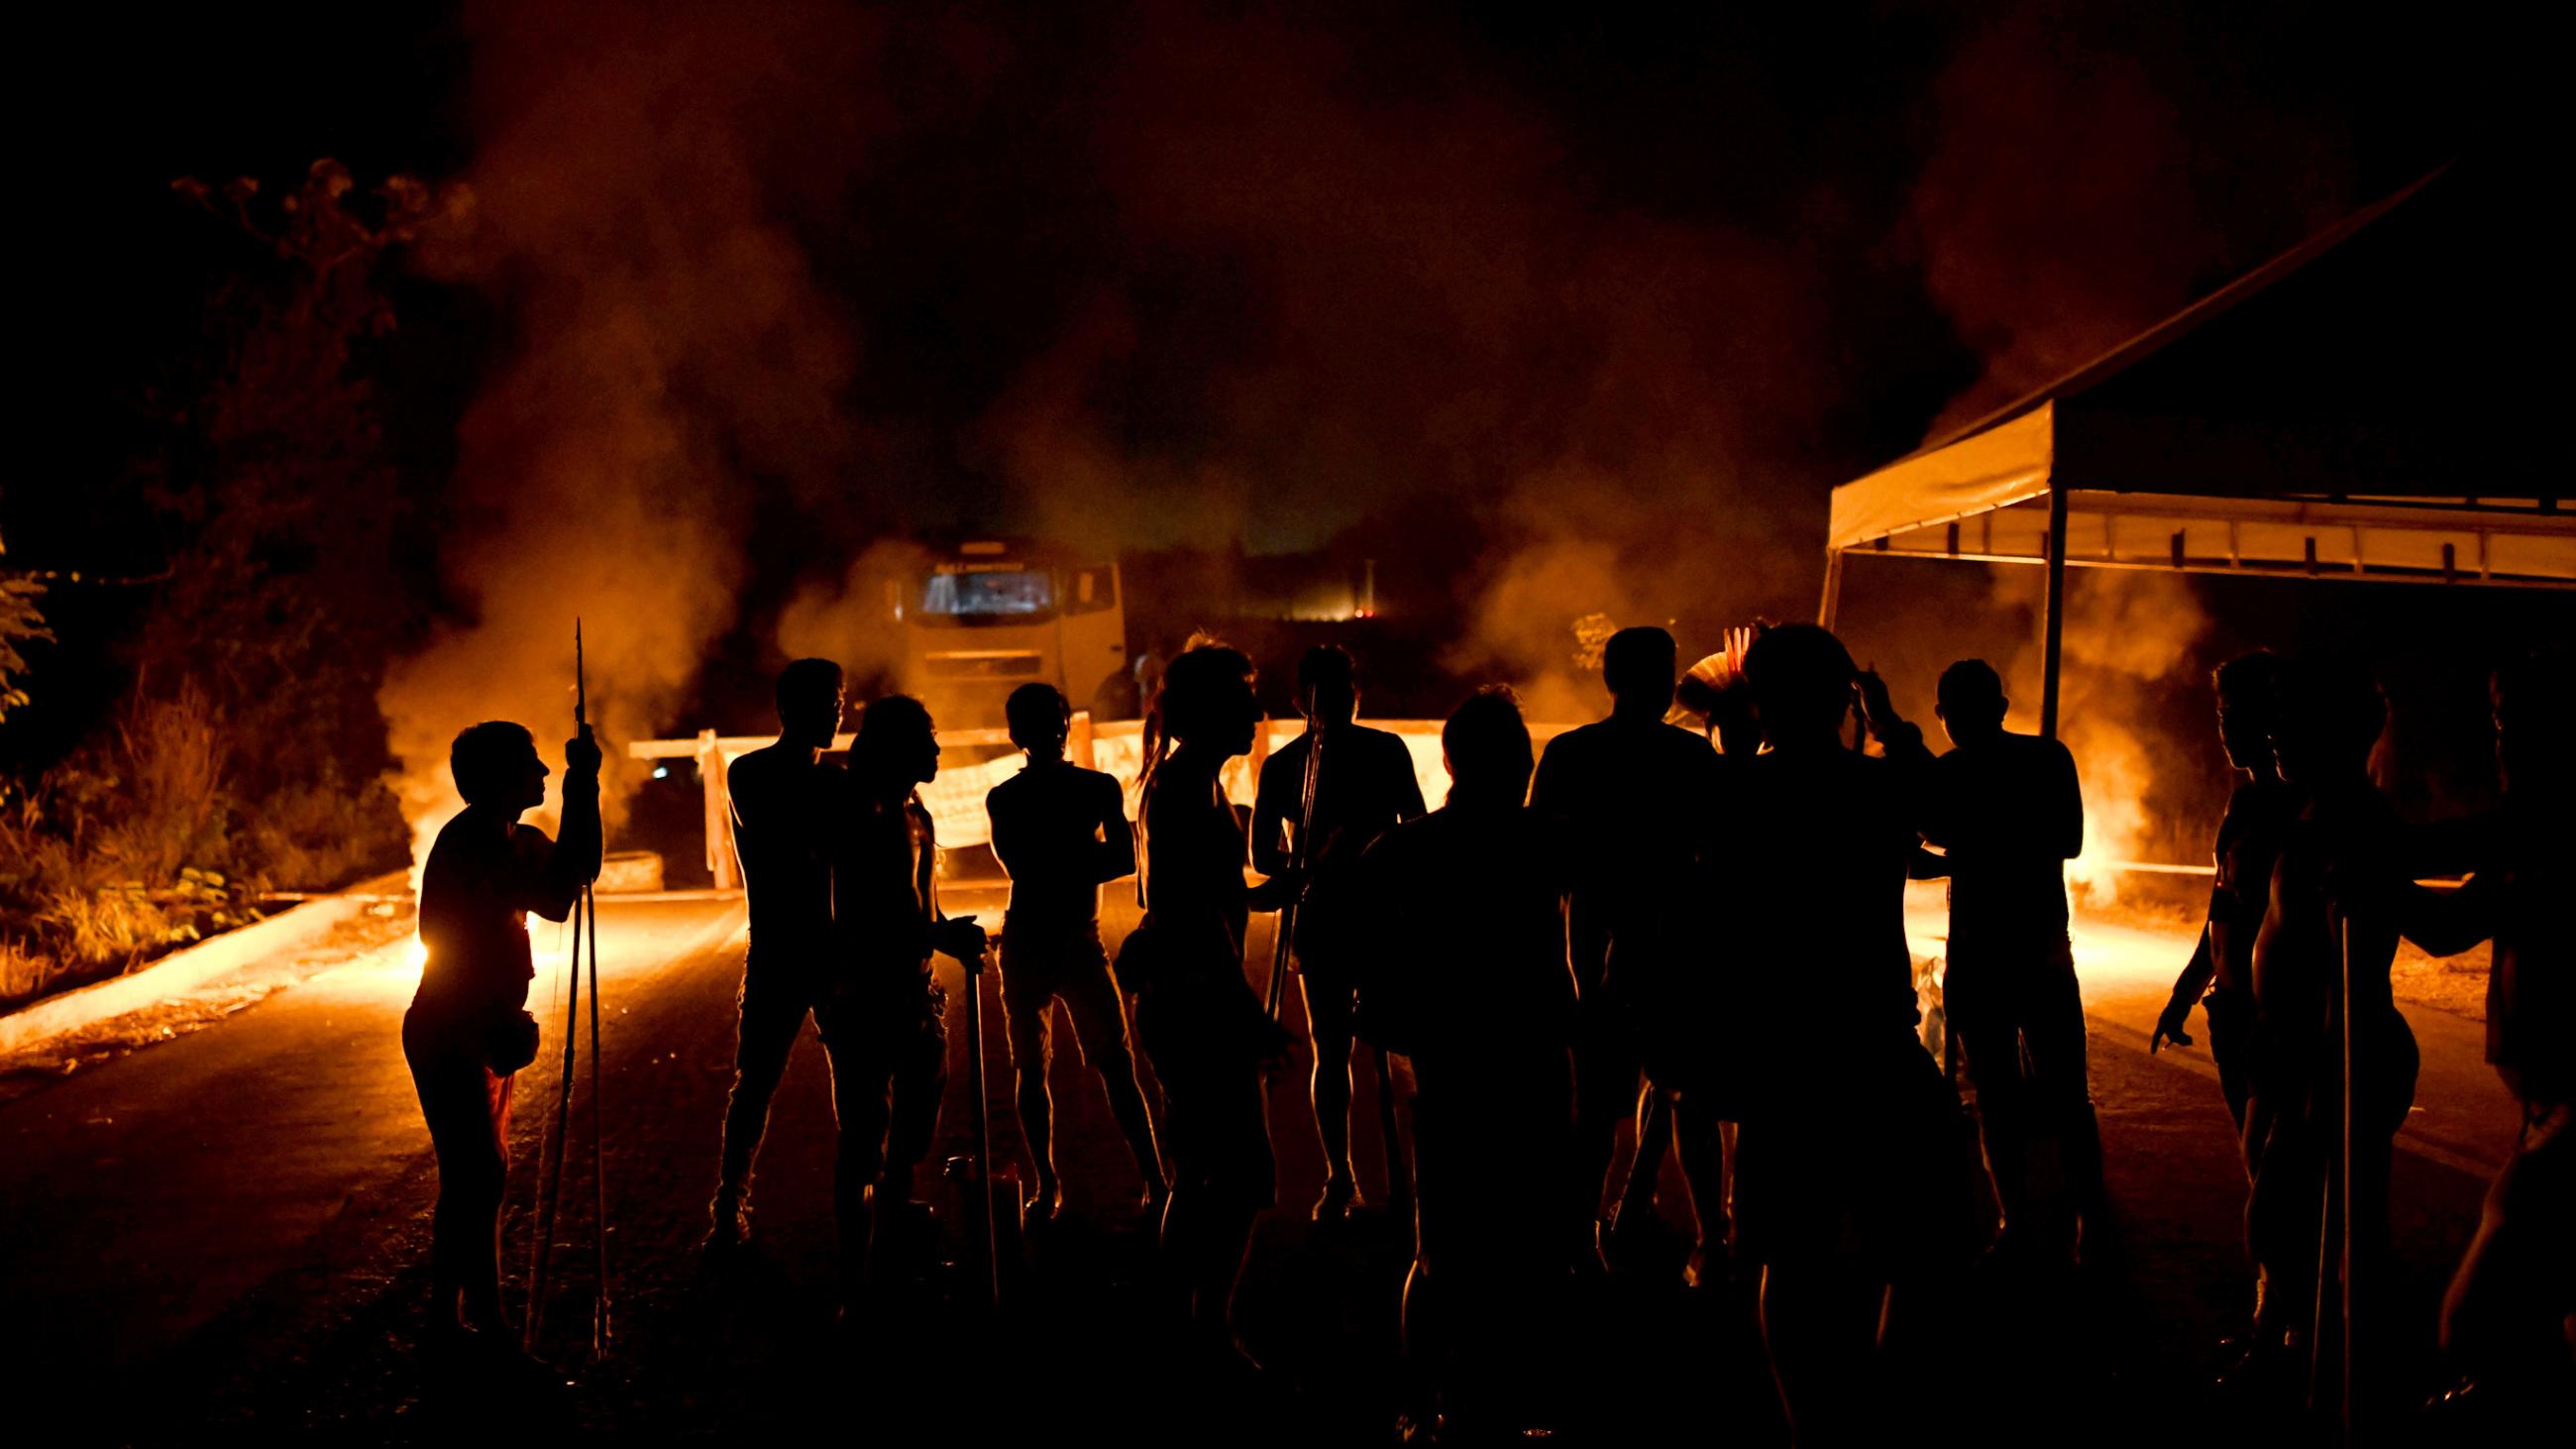 The image shows a large number of protesters at night silhouetted against a fire burning. 